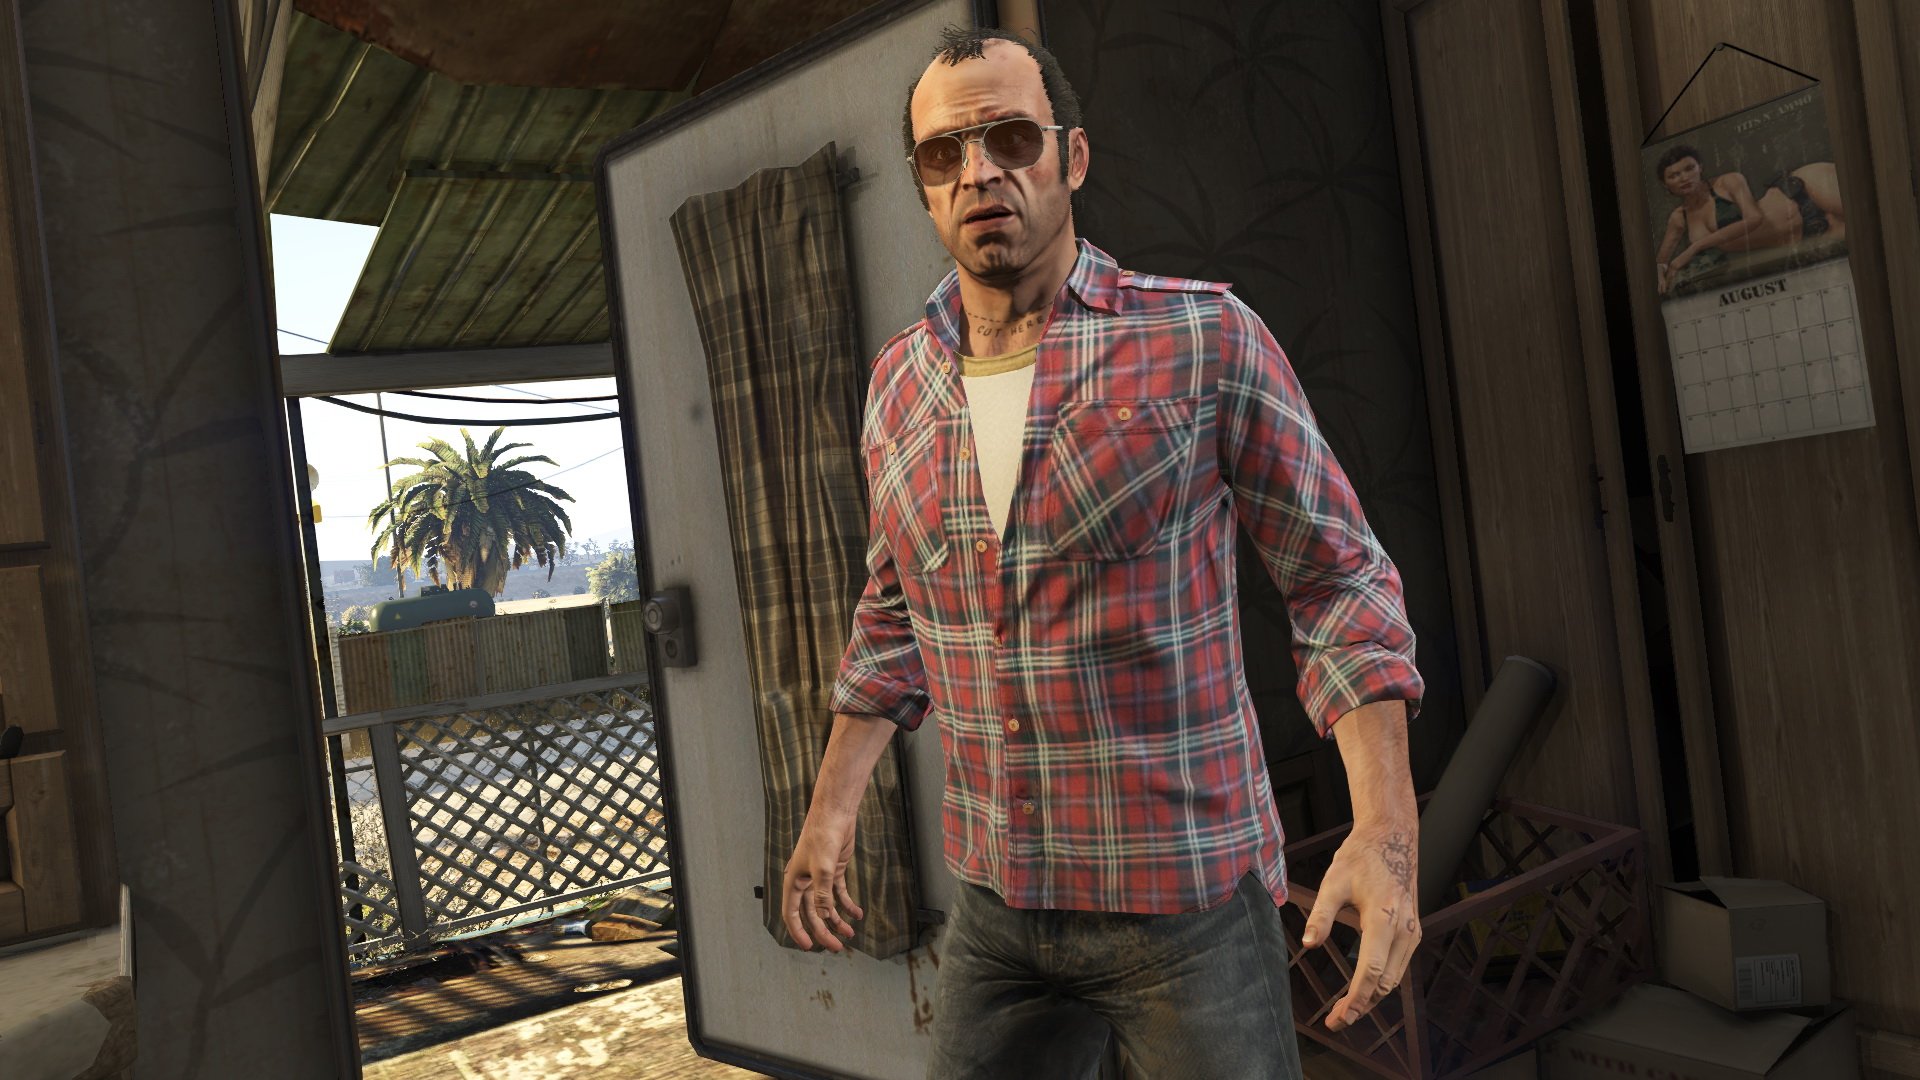 Video Game Grand Theft Auto V HD Wallpaper | Background Image